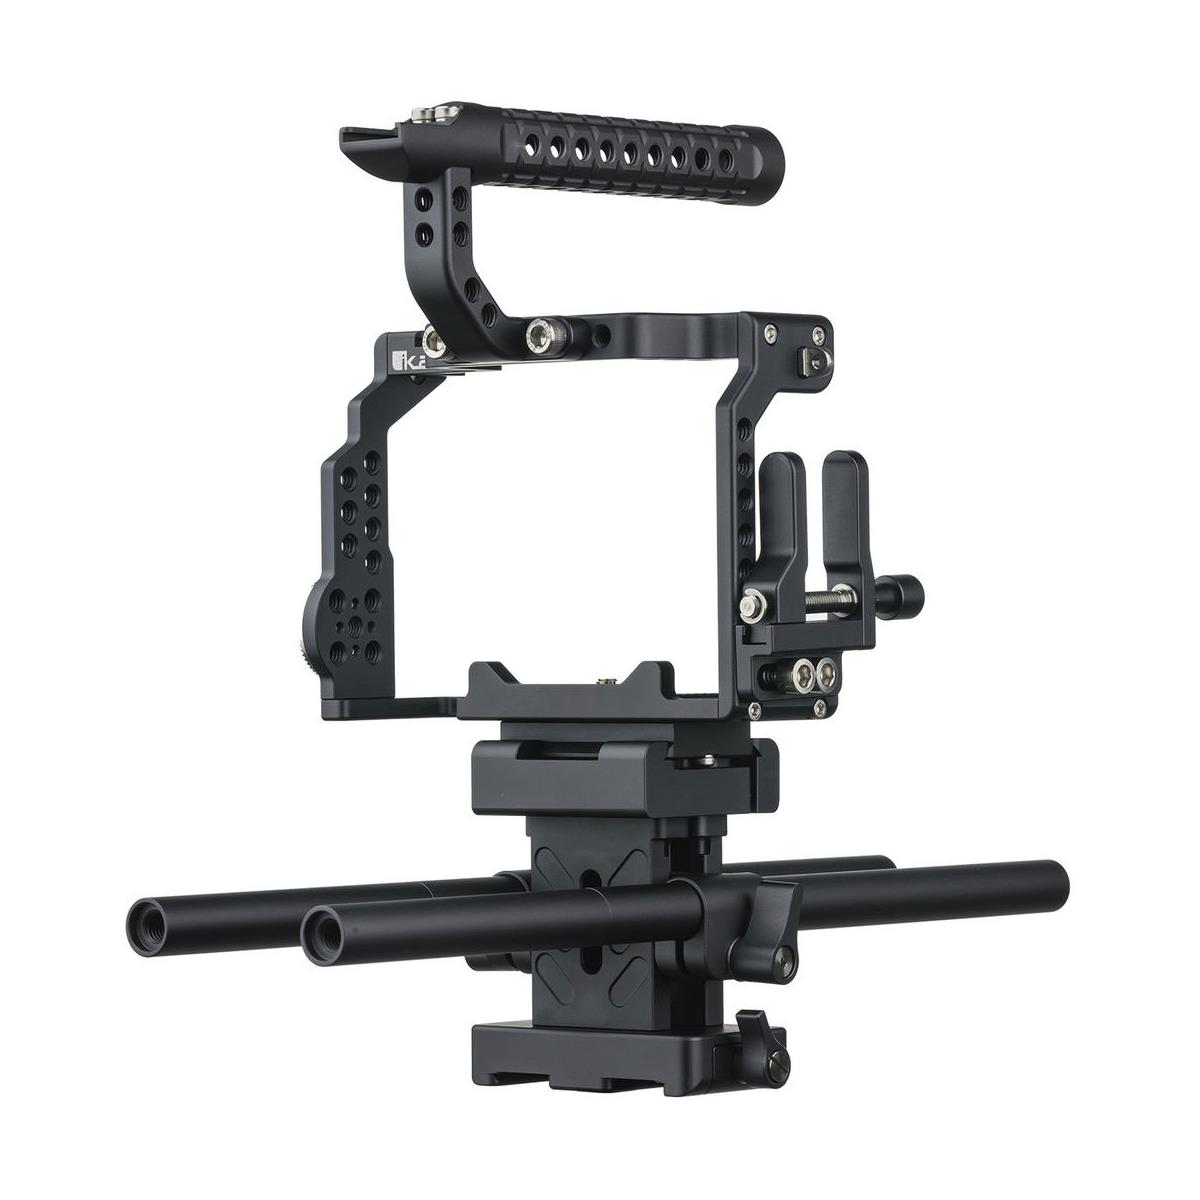 

Ikan Stratus Complete Cage for Sony A7R IV and A7III Series Cameras